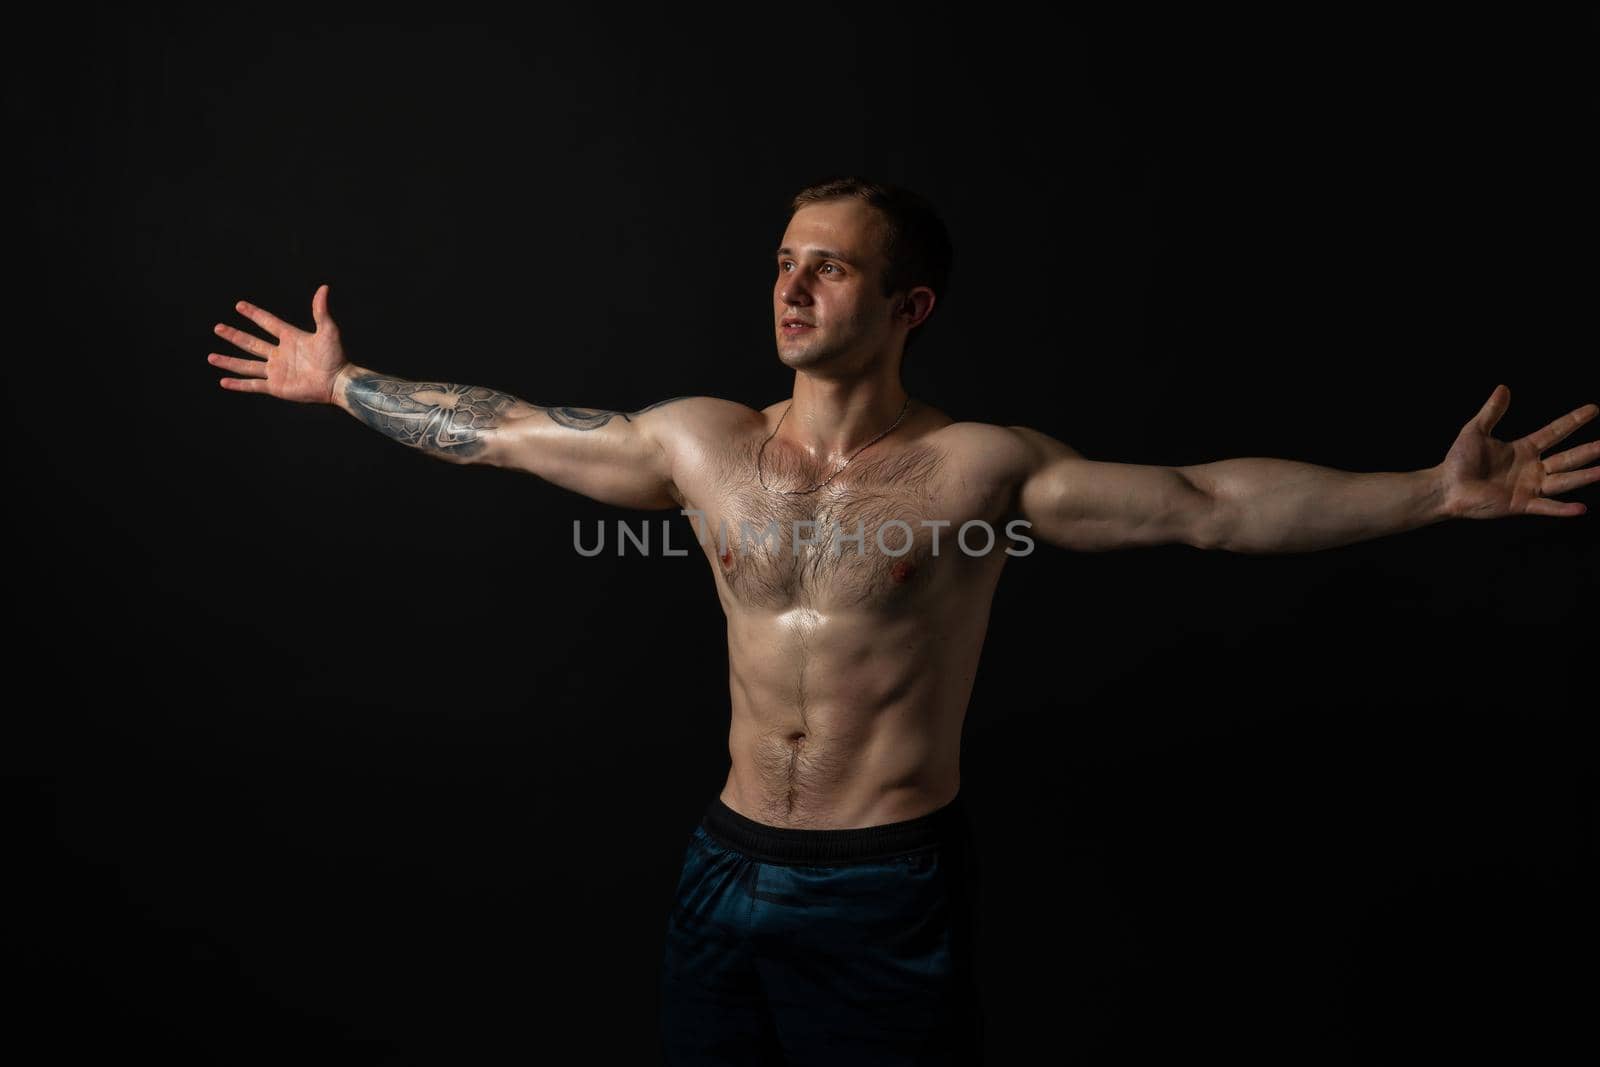 Man on black background keeps dumbbells pumped up in fitness bodybuilding sexy torso, athlete workout lifting heavy, weightlifting. Lift skin power, gym fit